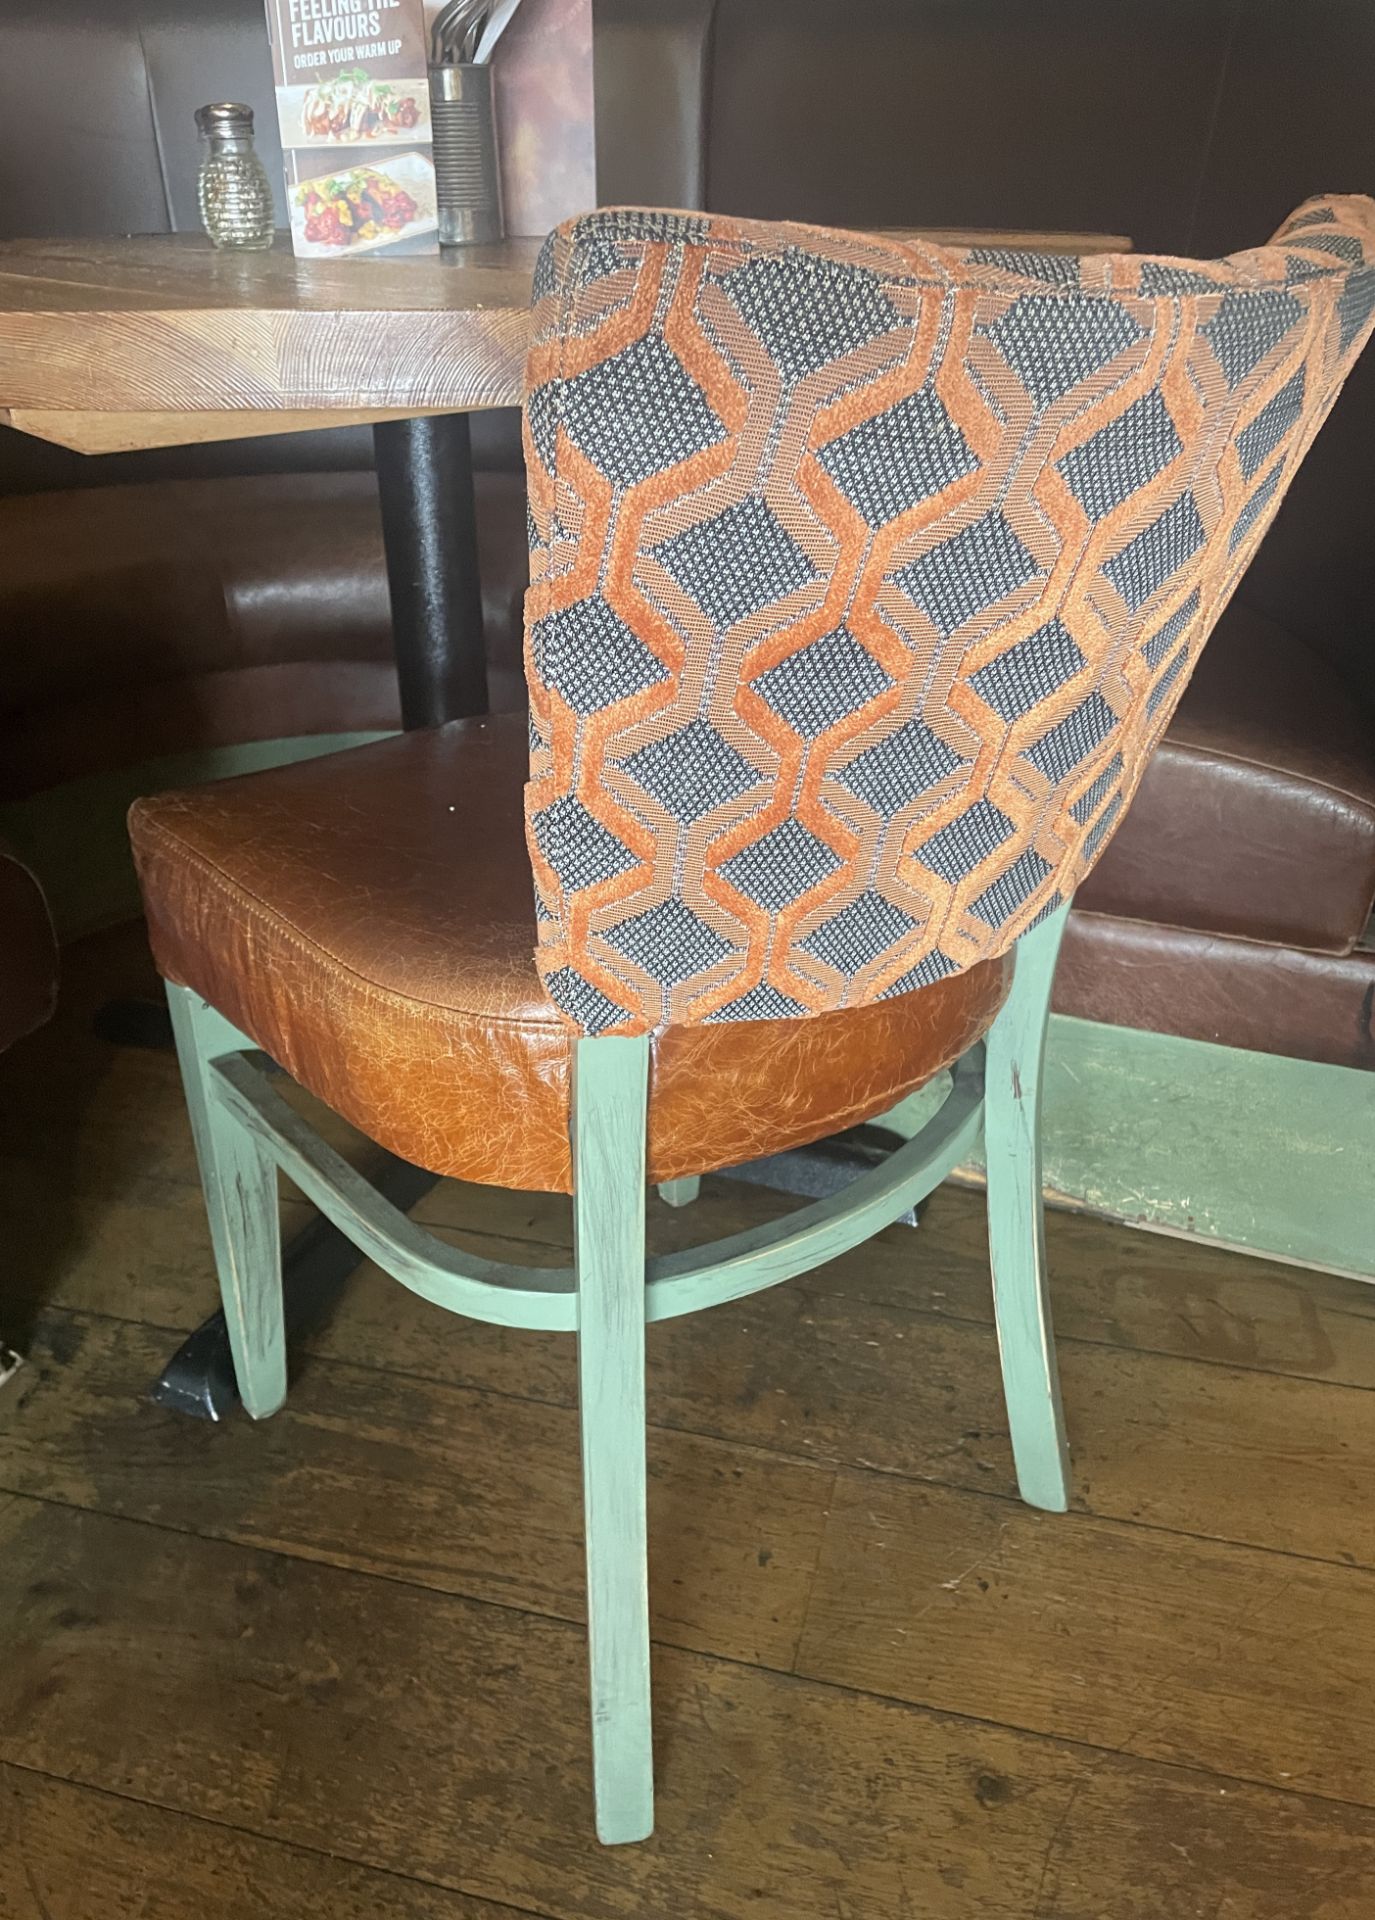 8 x Commercial Restaurant Dining Chairs Featuring Tan Leather Seats, Upholstered Back Rests and - Image 7 of 9